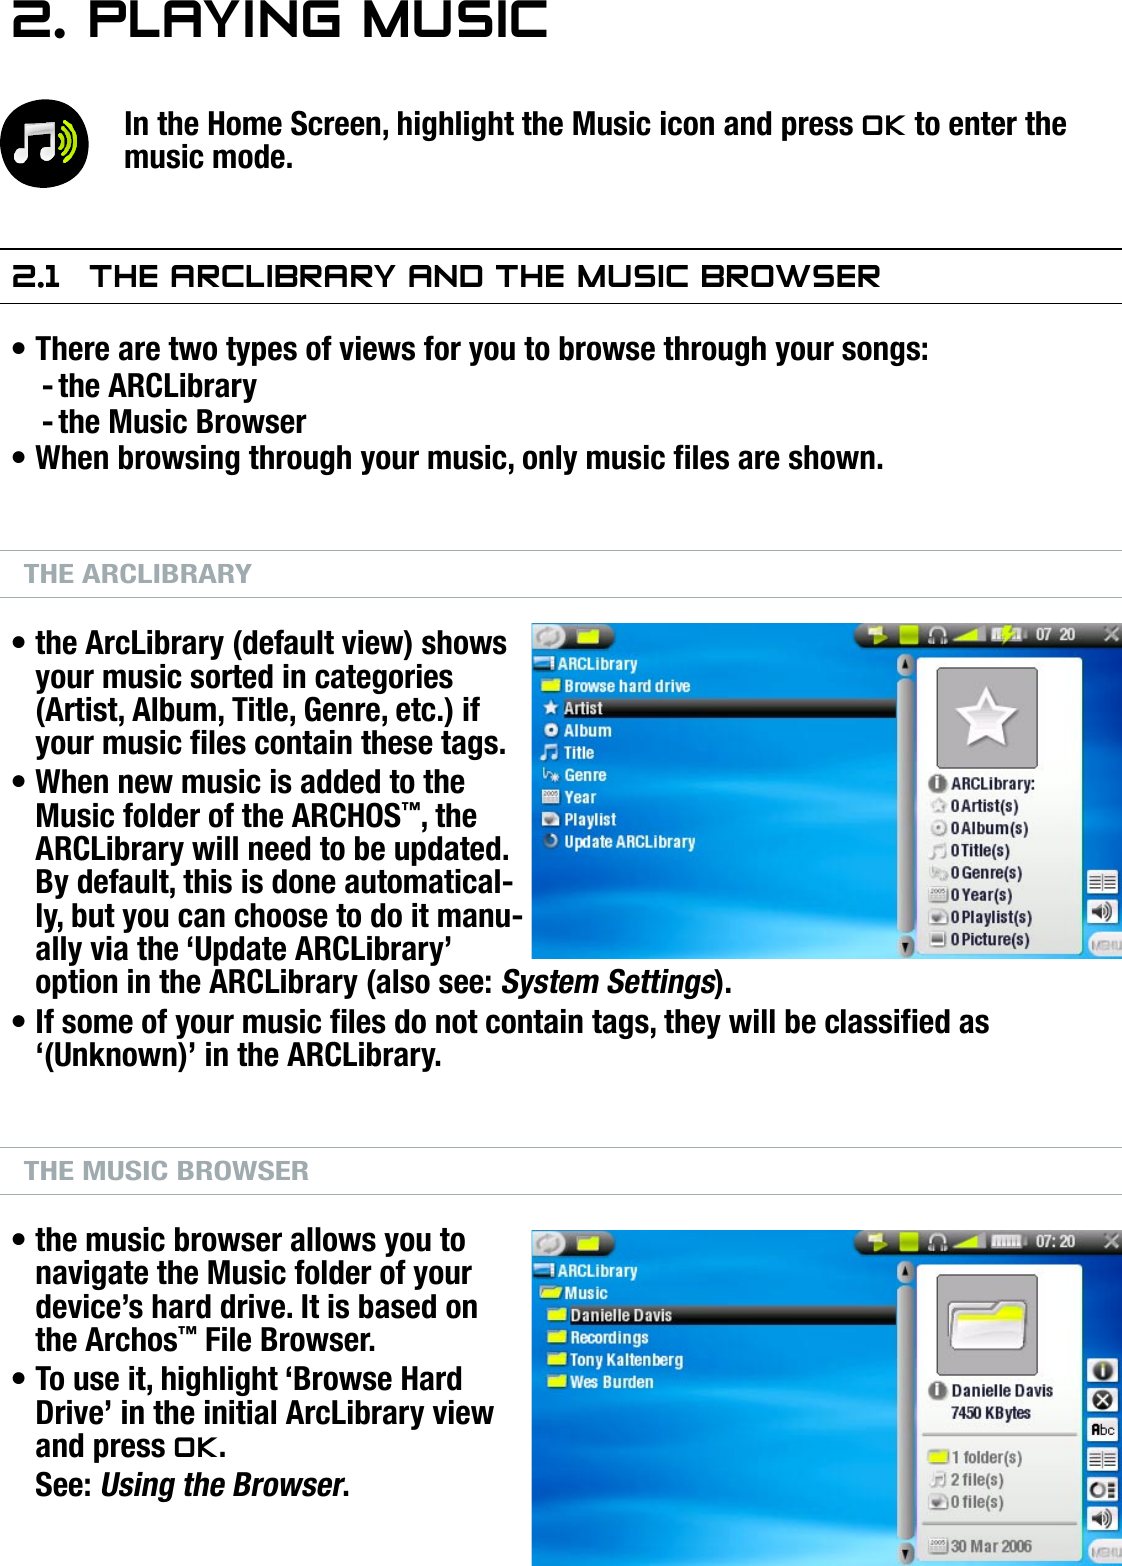 504/604MANUAL V2.0PLAYING MUSIC   &gt;   p. 142. PlayIng MusICIn the Home Screen, highlight the Music icon and press OK to enter the music mode.2.1  The arClIbrary and The MusIC brOwserThere are two types of views for you to browse through your songs:the ARCLibrarythe Music BrowserWhen browsing through your music, only music les are shown.THE ARCLIBRARYthe ArcLibrary (default view) shows your music sorted in categories (Artist, Album, Title, Genre, etc.) if your music les contain these tags.When new music is added to the Music folder of the ARCHOS™, the ARCLibrary will need to be updated. By default, this is done automatical-ly, but you can choose to do it manu-ally via the ‘Update ARCLibrary’ option in the ARCLibrary (also see: System Settings).If some of your music les do not contain tags, they will be classied as ‘(Unknown)’ in the ARCLibrary.THE MUSIC BROWSERthe music browser allows you to navigate the Music folder of your device’s hard drive. It is based on the Archos™ File Browser.To use it, highlight ‘Browse Hard Drive’ in the initial ArcLibrary view and press OK.See: Using the Browser.•--••••••